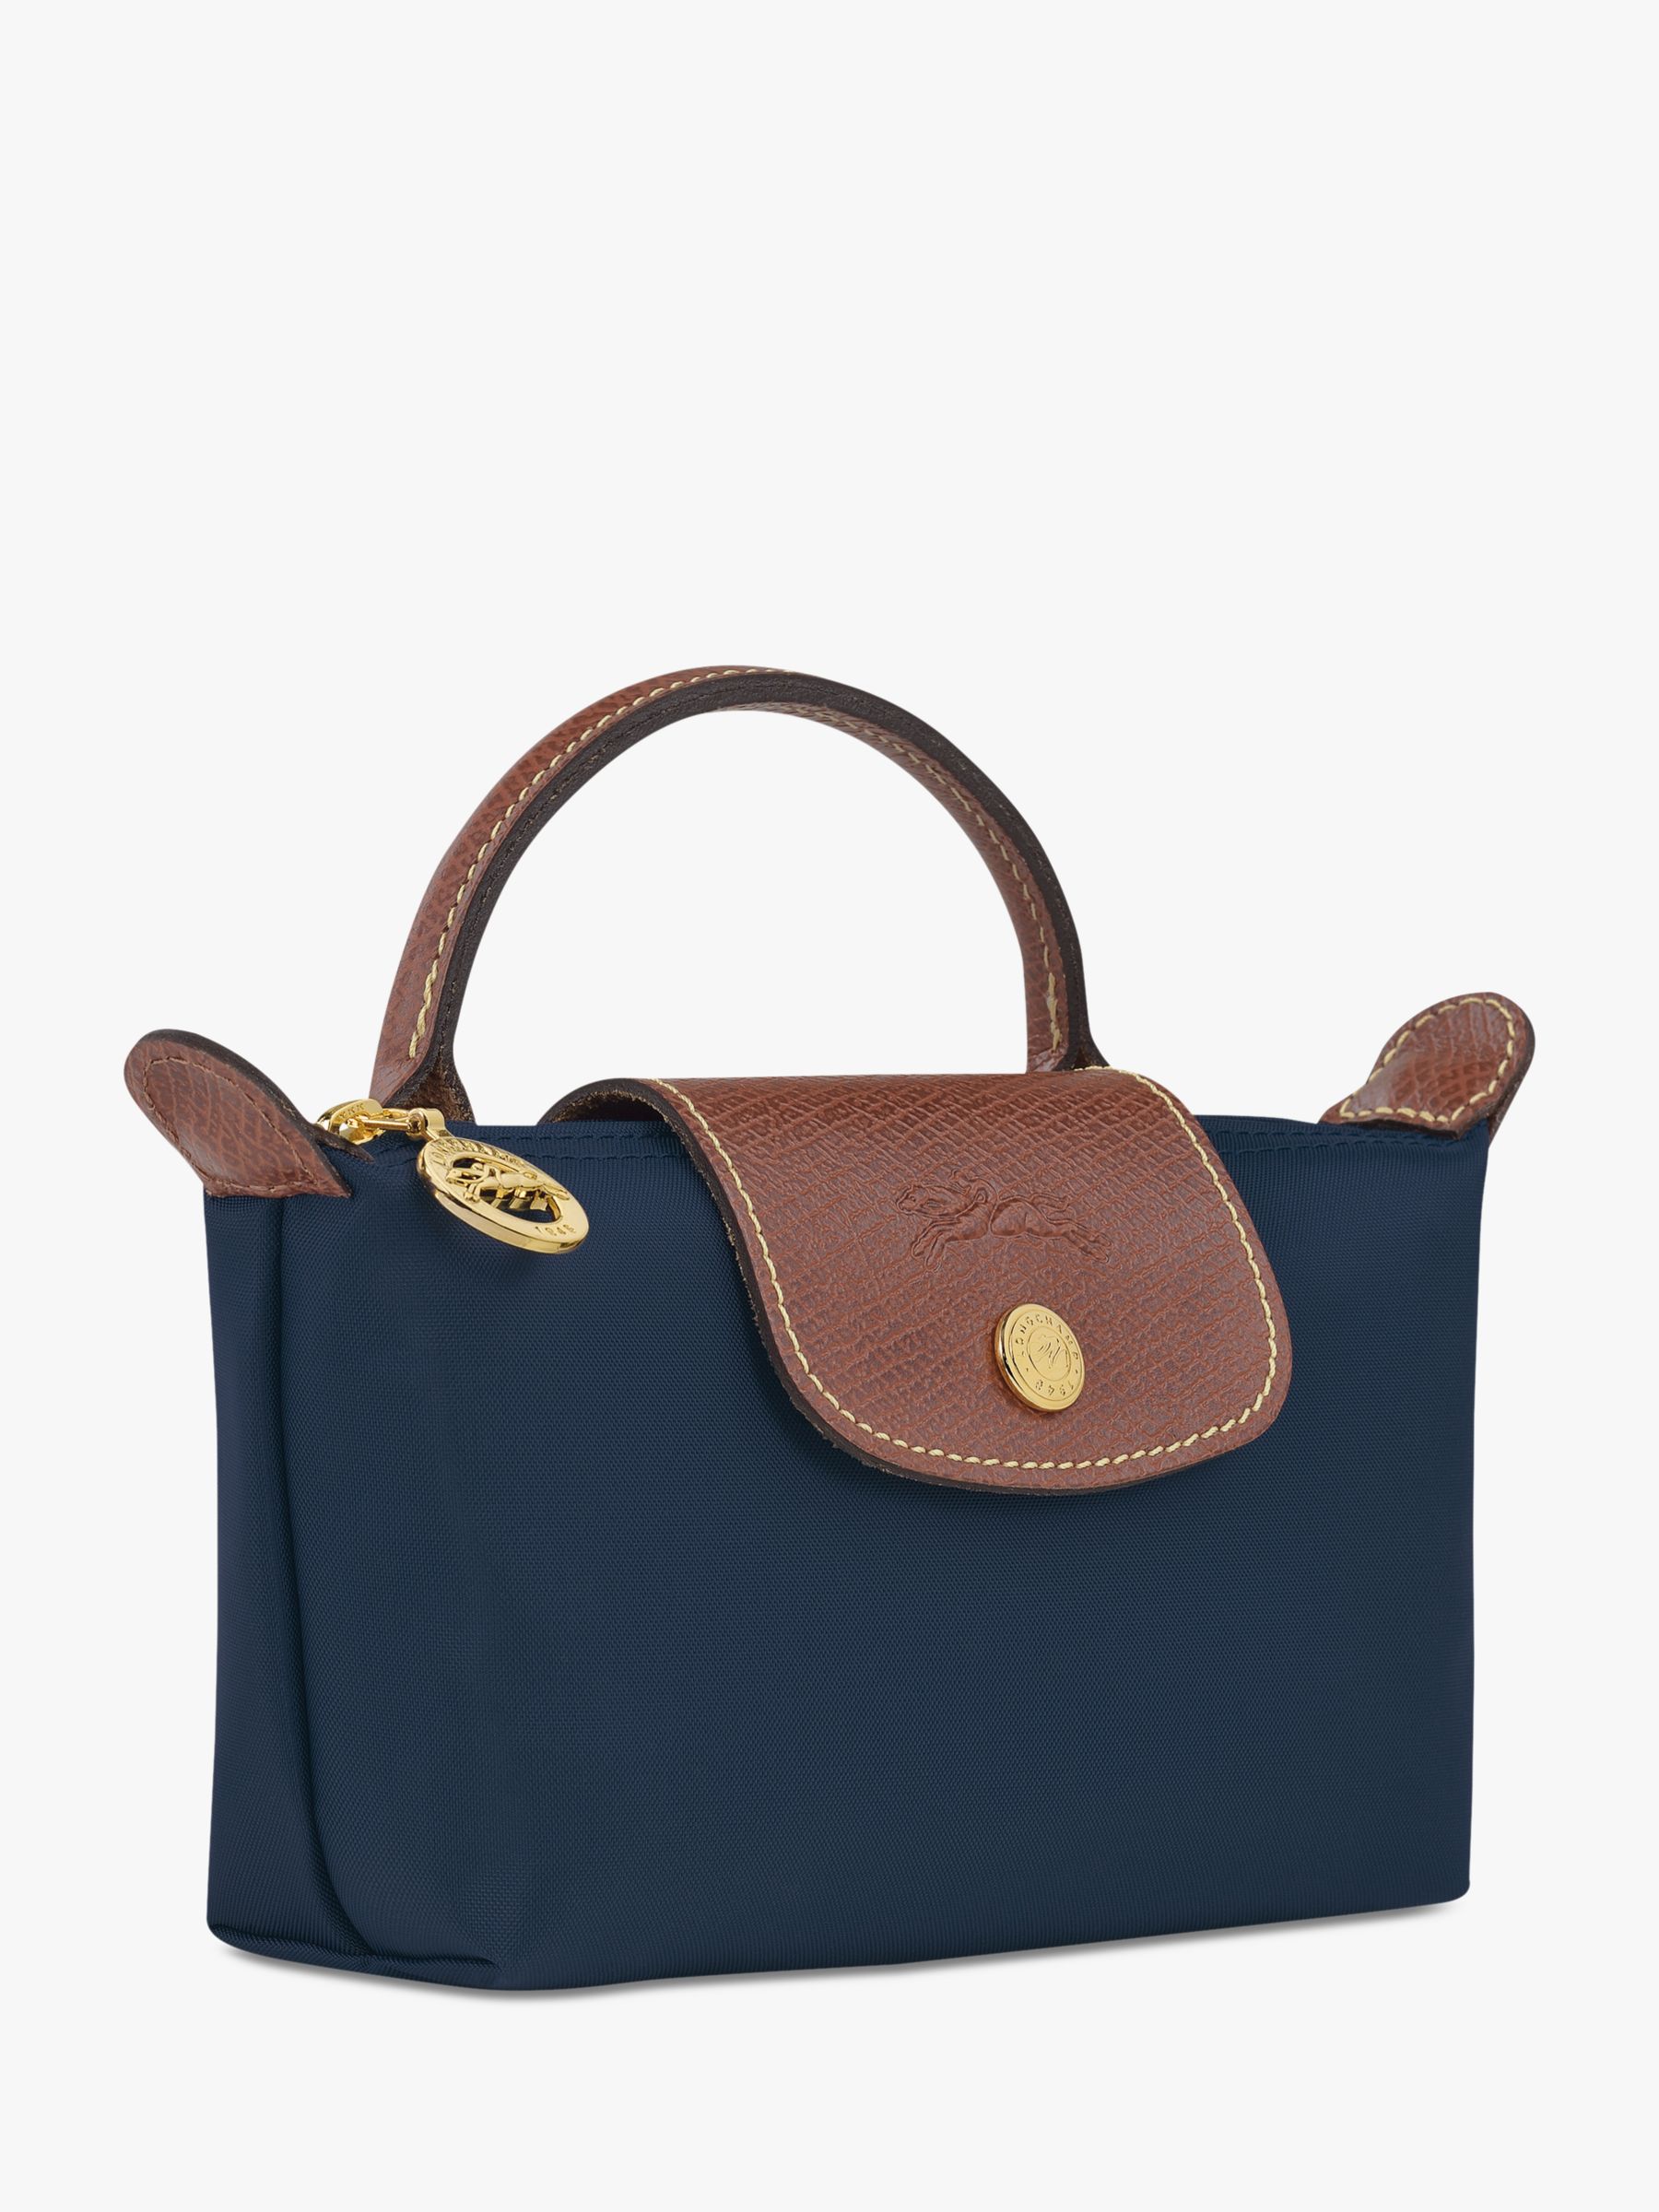 How to add the strap to Longchamp Le Pliage Pouch with Handle! #longch